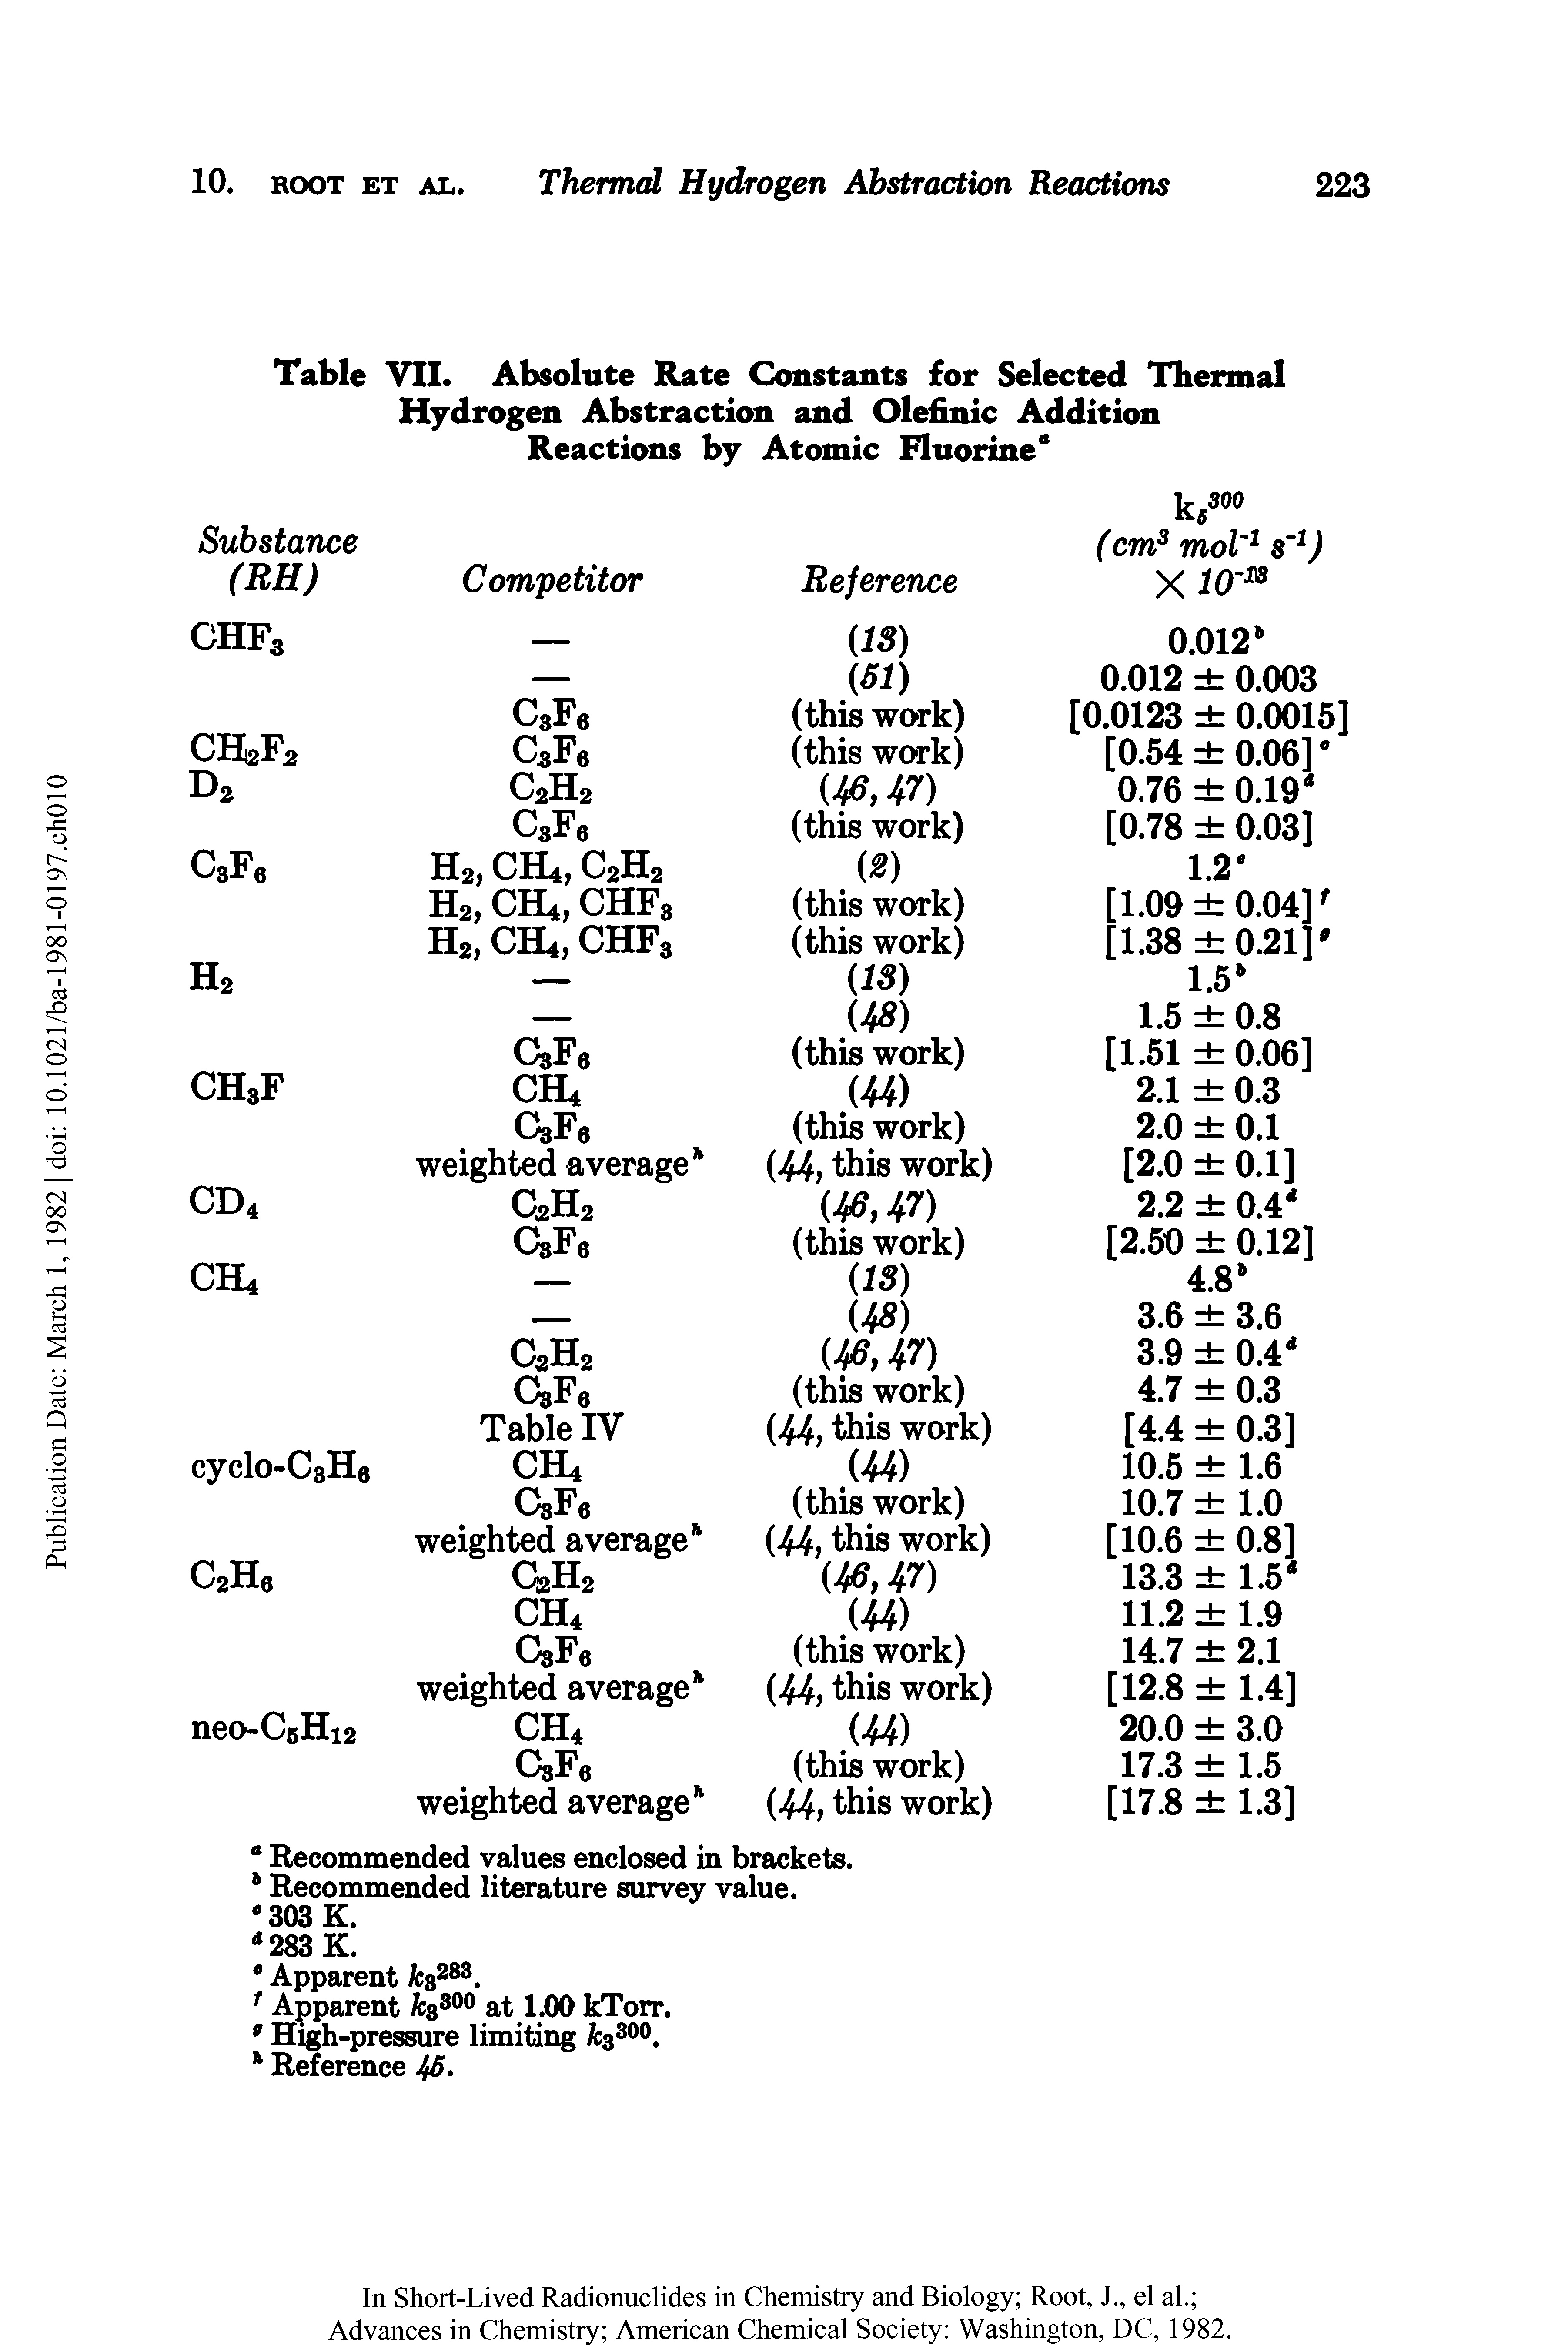 Table VII. Absolute Rate Constants for Selected Thermal Hydrogen Abstraction and Olefinic Addition Reactions by Atomic Fluorine"...